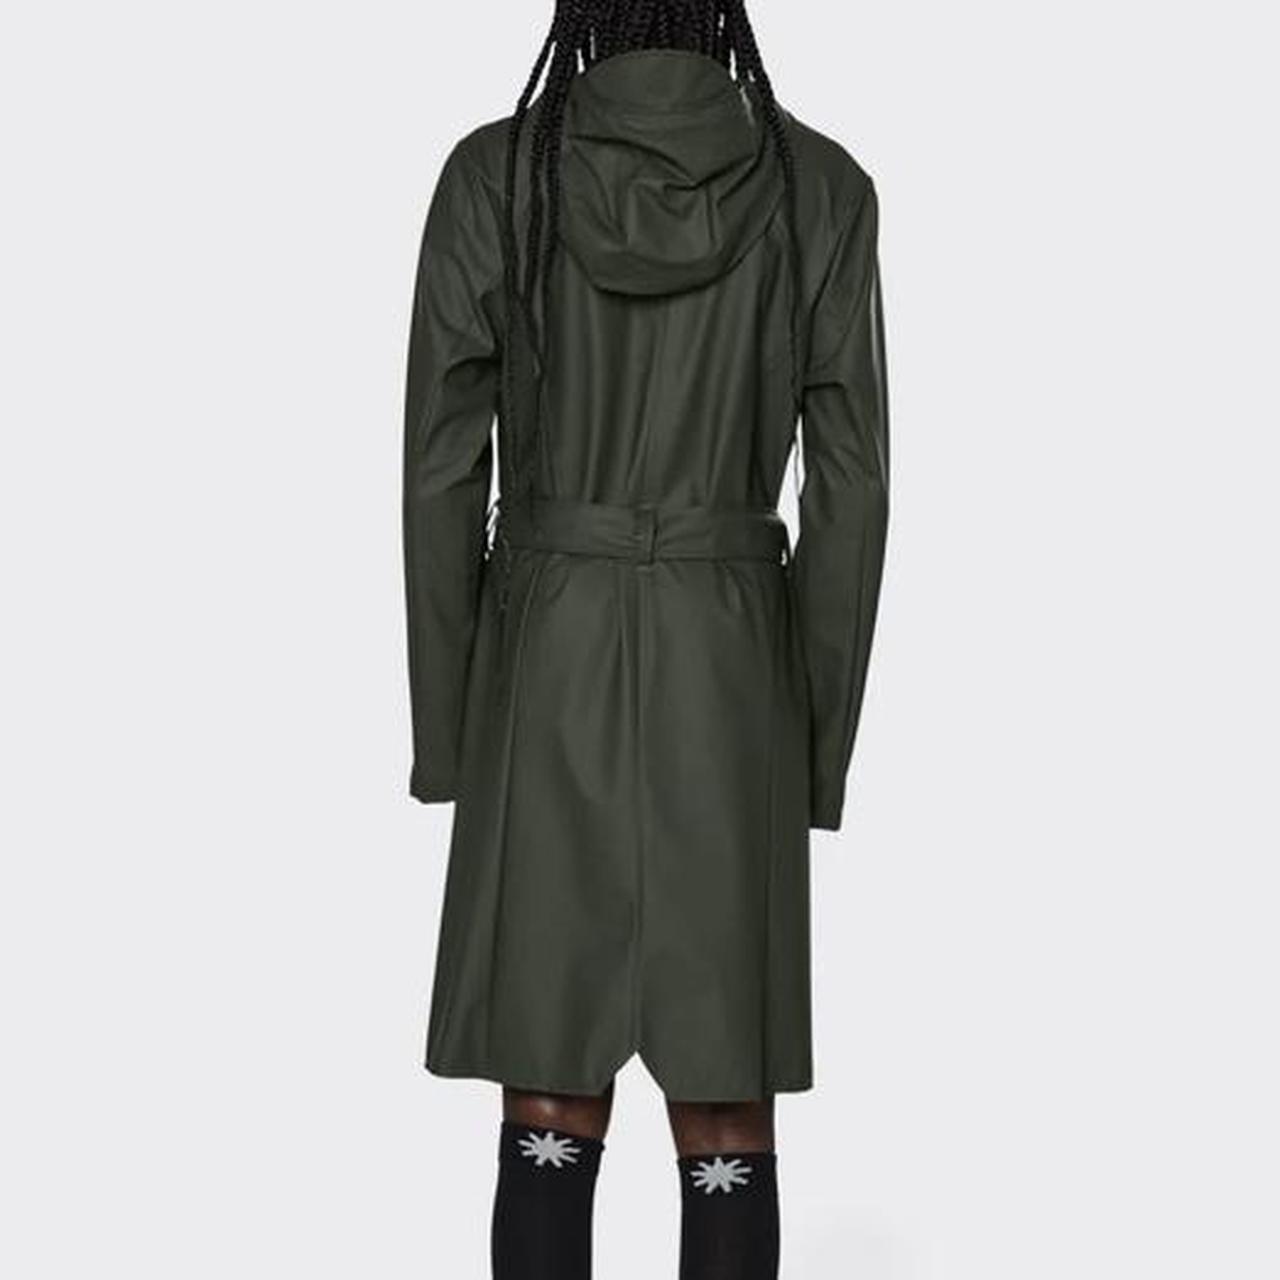 Product Image 2 - Rains Curve Raincoat in Green

Size